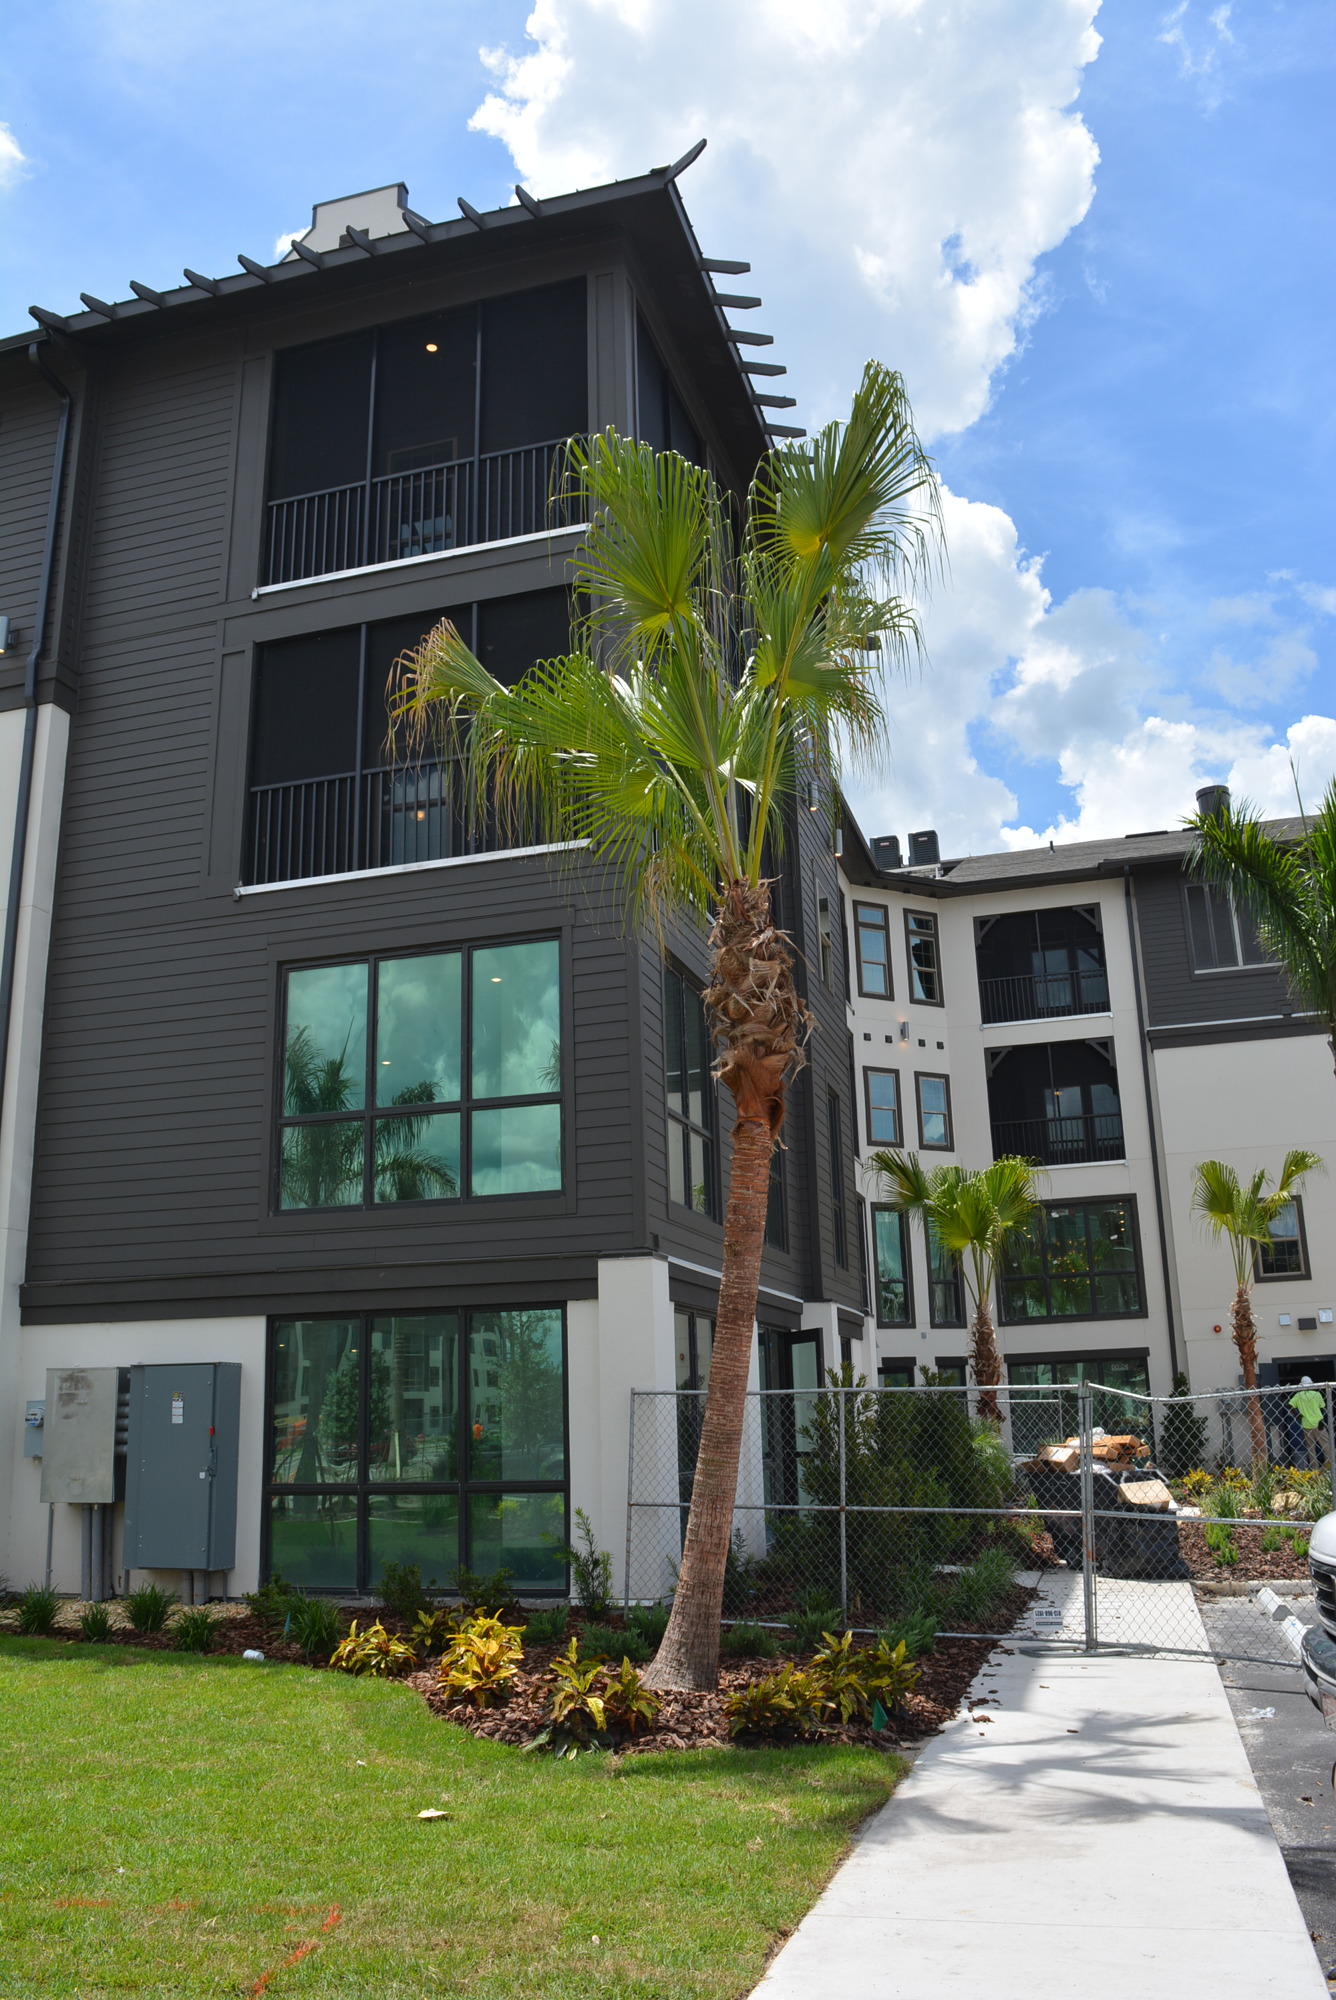 Davis Development's project, Botanic Waterside Apartments in Lakewood Ranch's Waterside community, are expected to open this fall but no specific date or rental rates have been set.